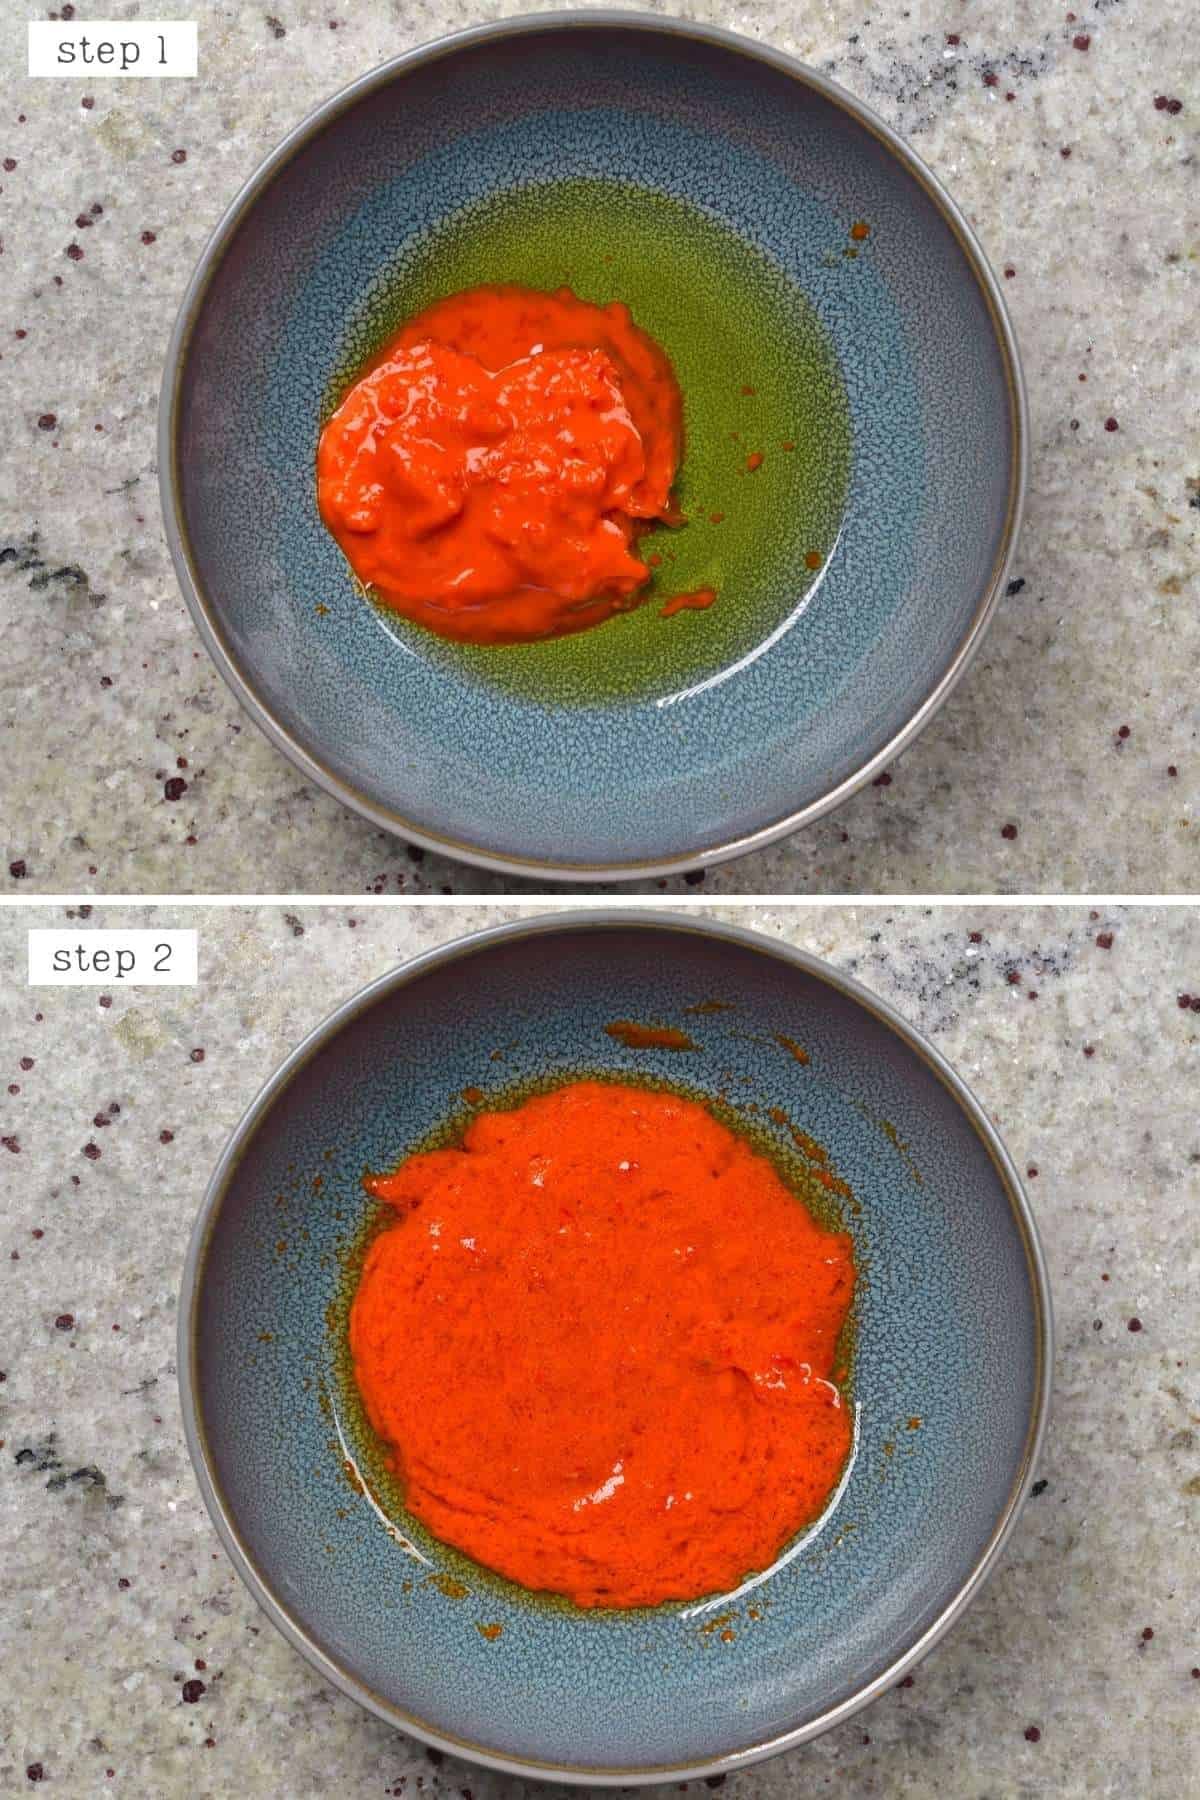 Steps for mixing oil with chili sauce